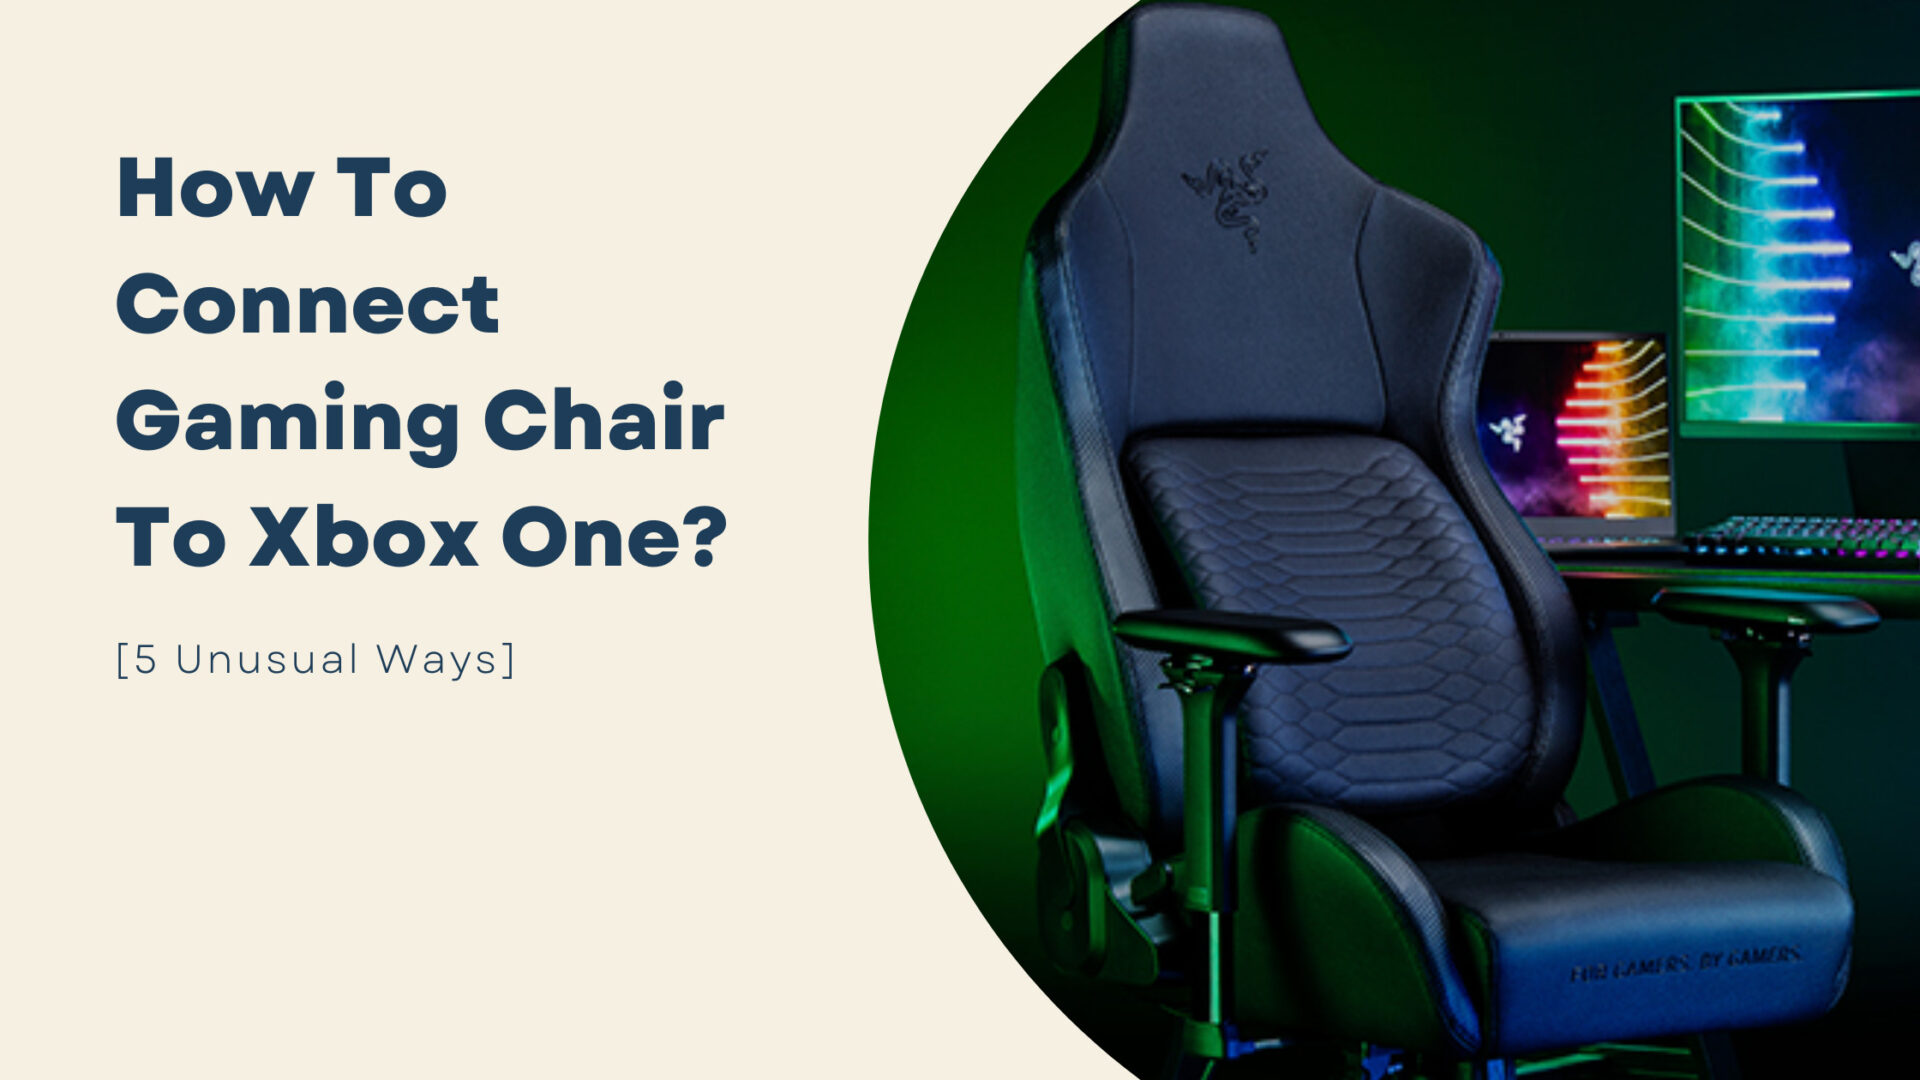 How To Connect Gaming Chair To Xbox One